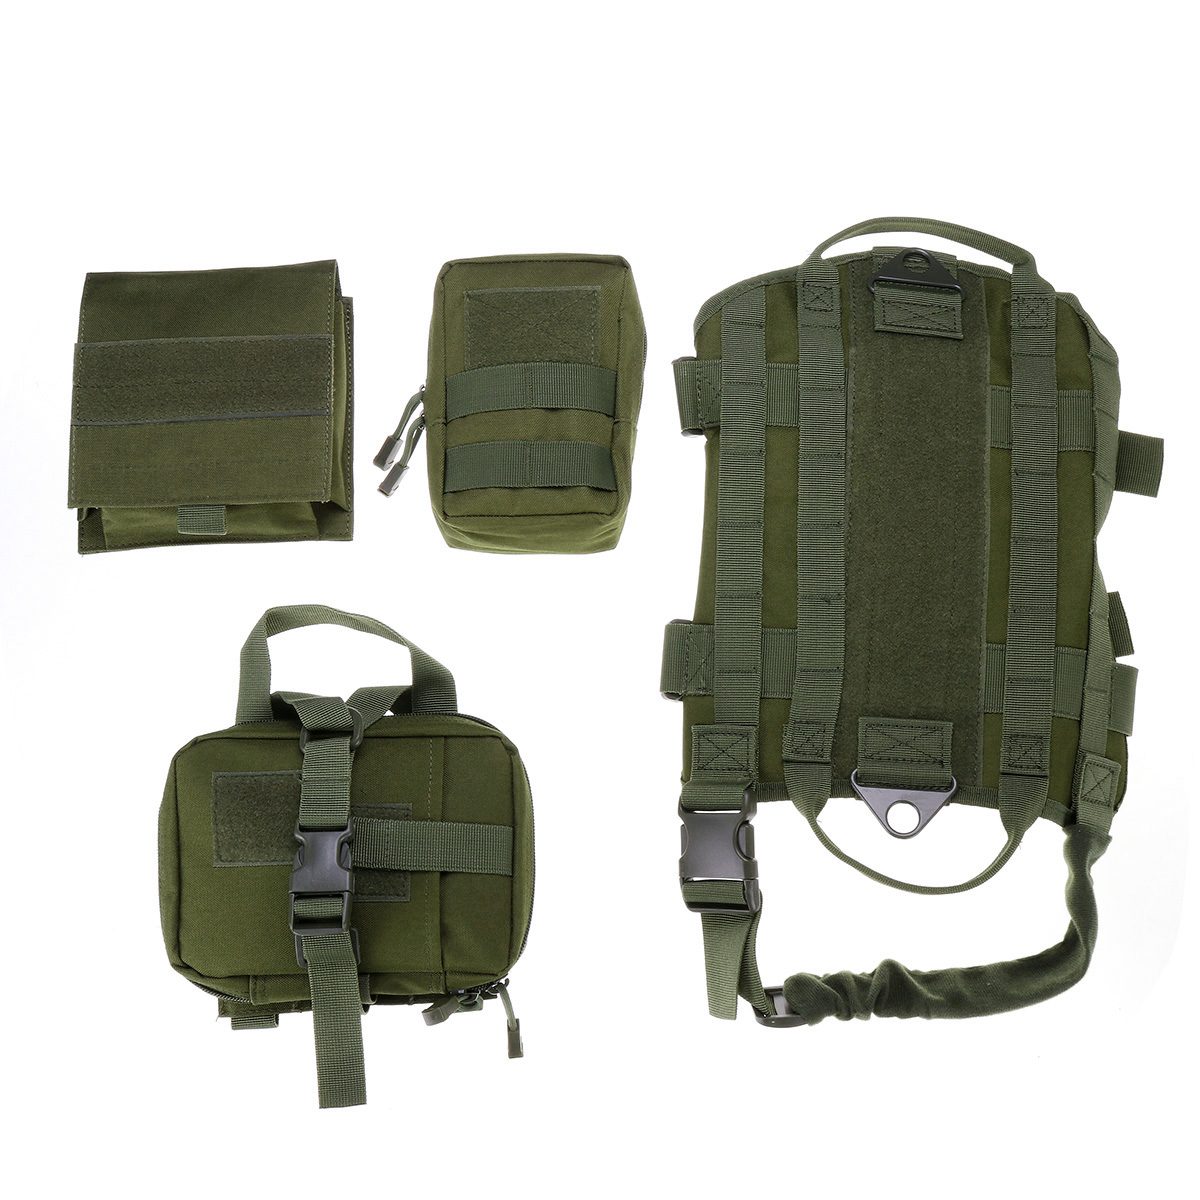 S-1000D-Nylon-Waterproof-Dog-Tactical-Vest-Military-Training-Clothes-1600242-4